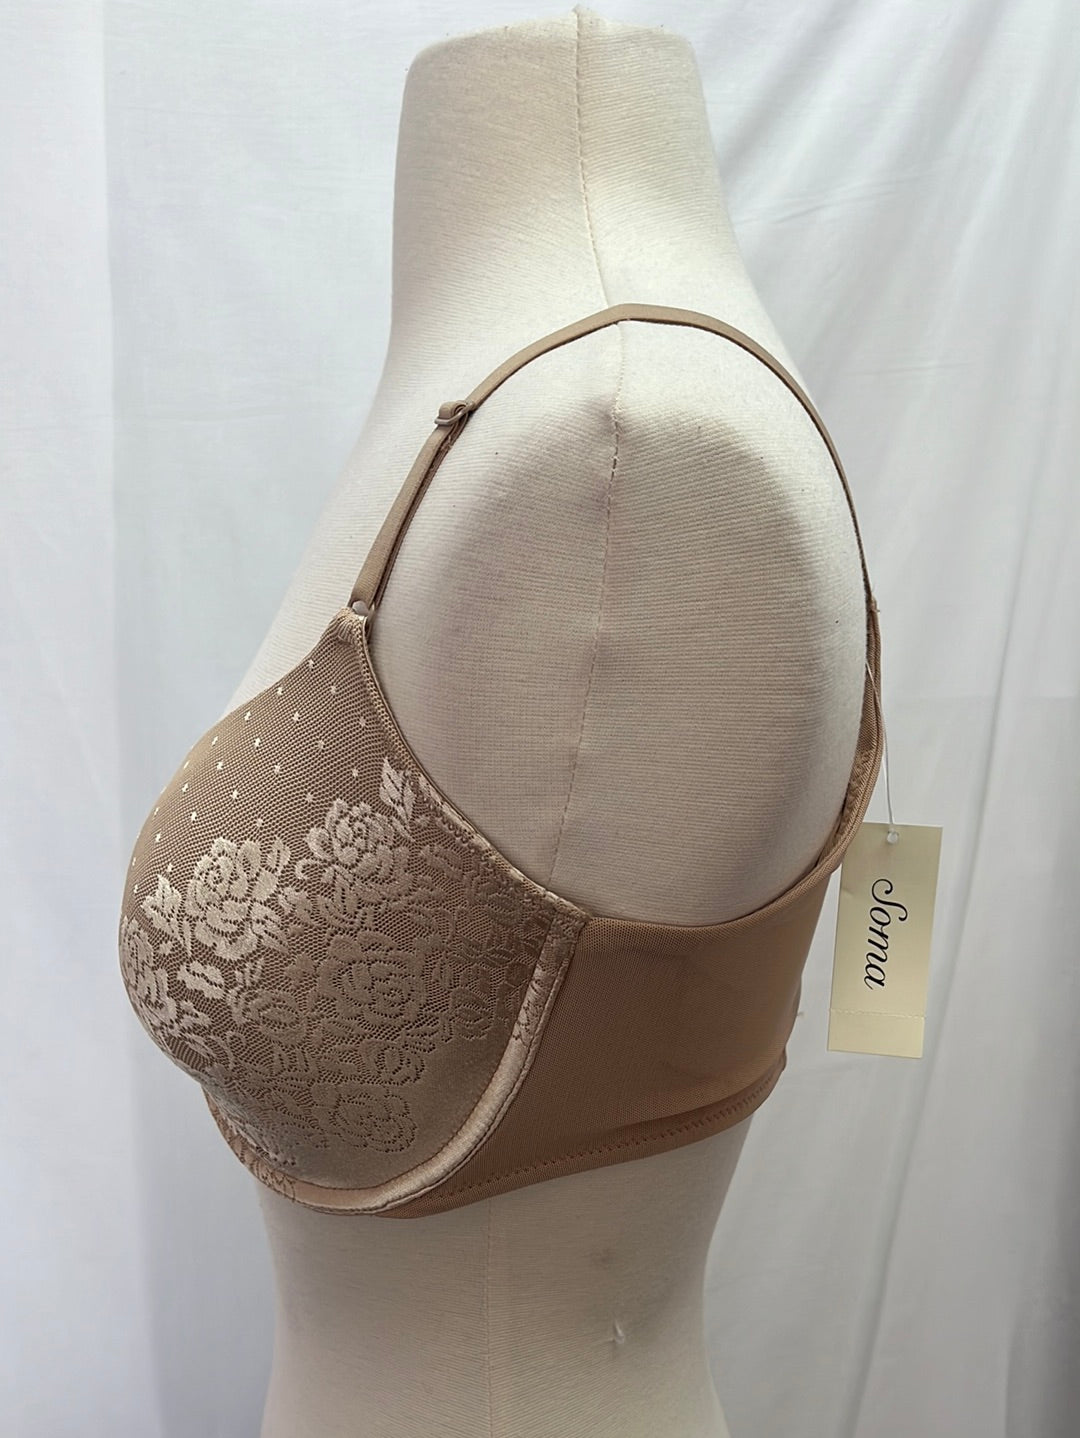 NWT -- SOMA Stunning Support Nude Floral Lace Posture Bra -- Size 32DD –  CommunityWorx Thrift Online